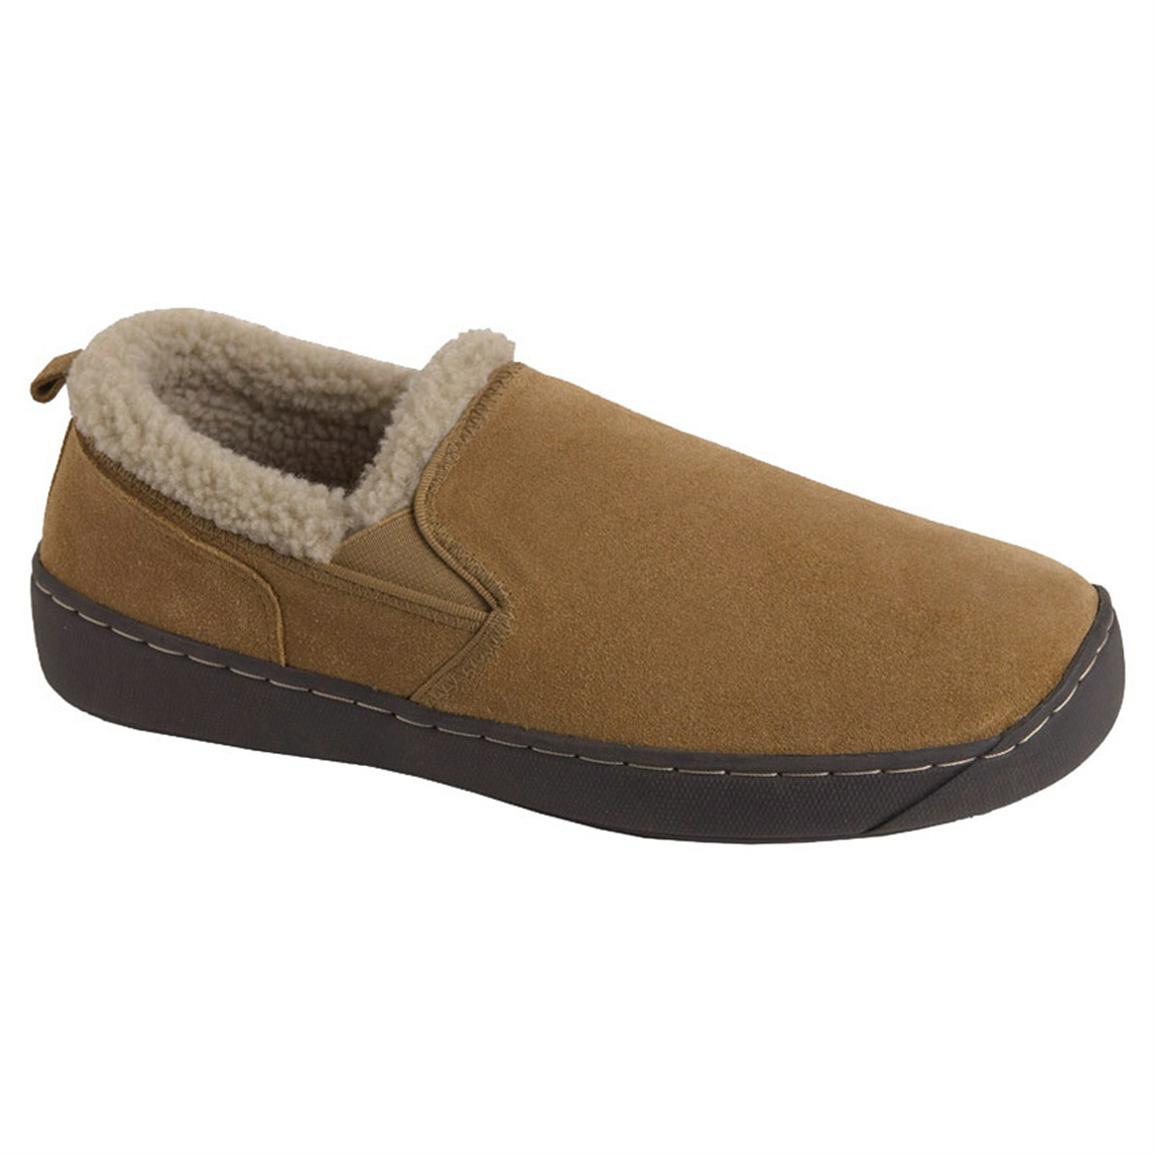 Men's L. B. Evans® Bryce Slippers - 216566, Slippers at Sportsman's Guide